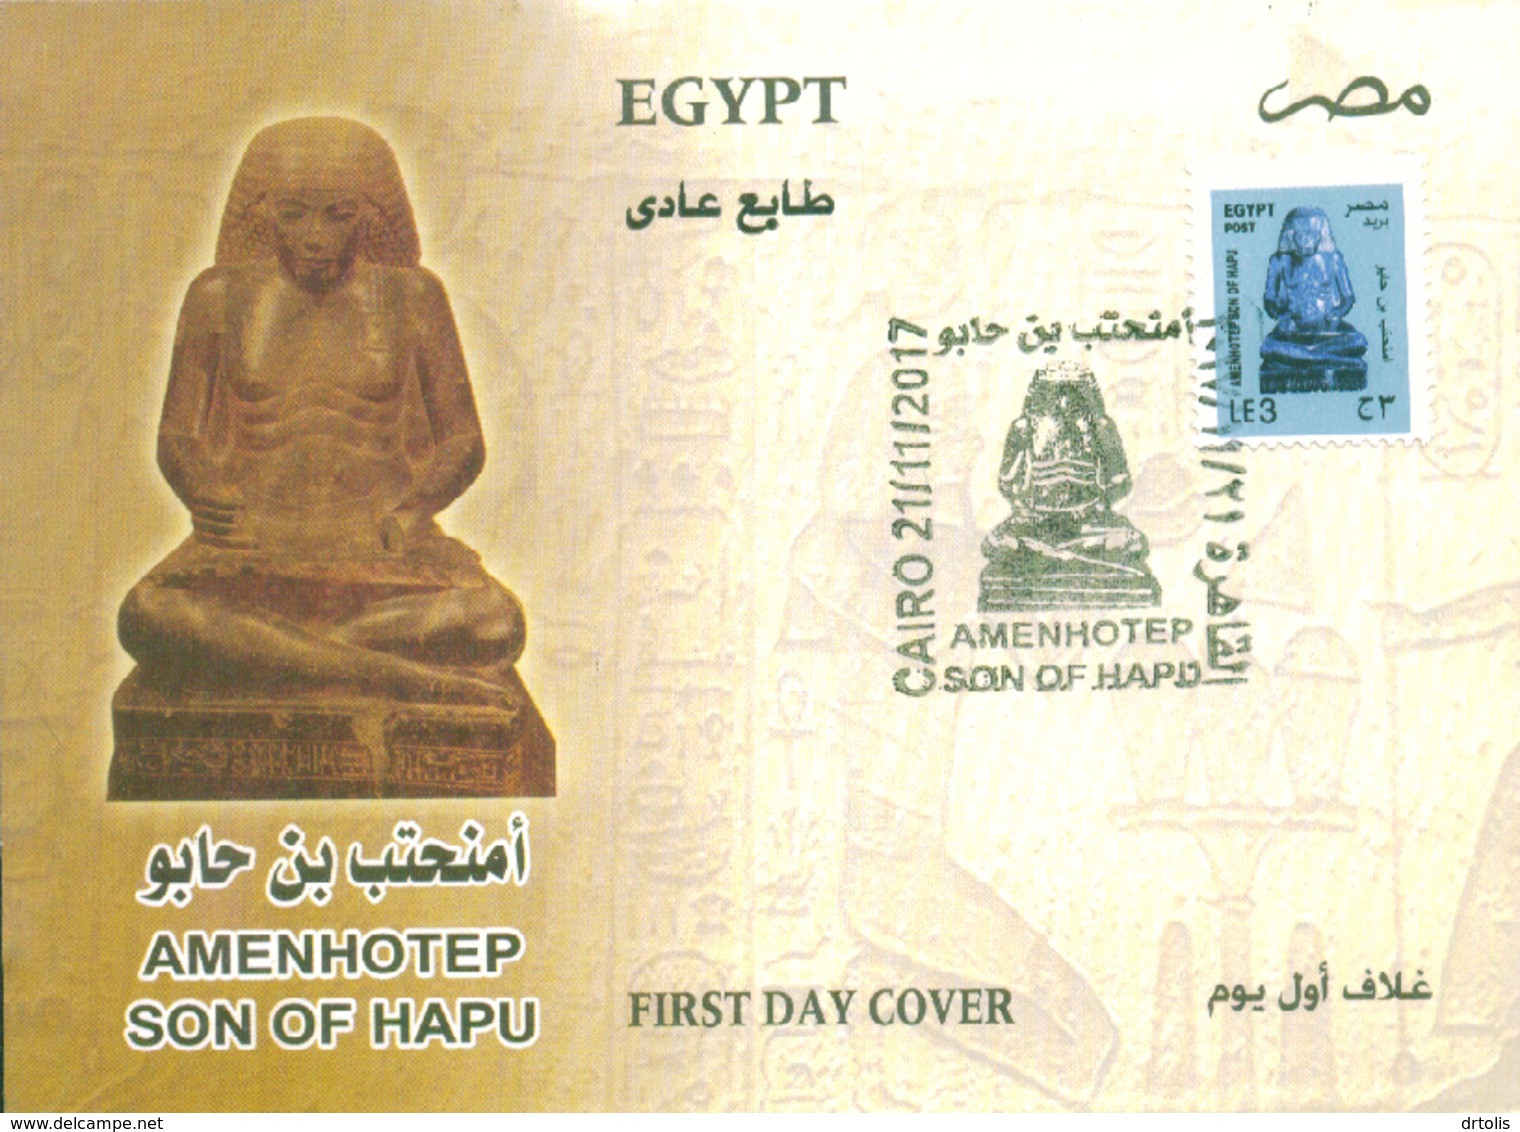 EGYPT / 2015 - 2017 / THUTMOSE III / AMENHOTEP ; SON OF HAPU / 2 FDCS WITH DIFFERENT DATES OF ISSUE ???? - Storia Postale